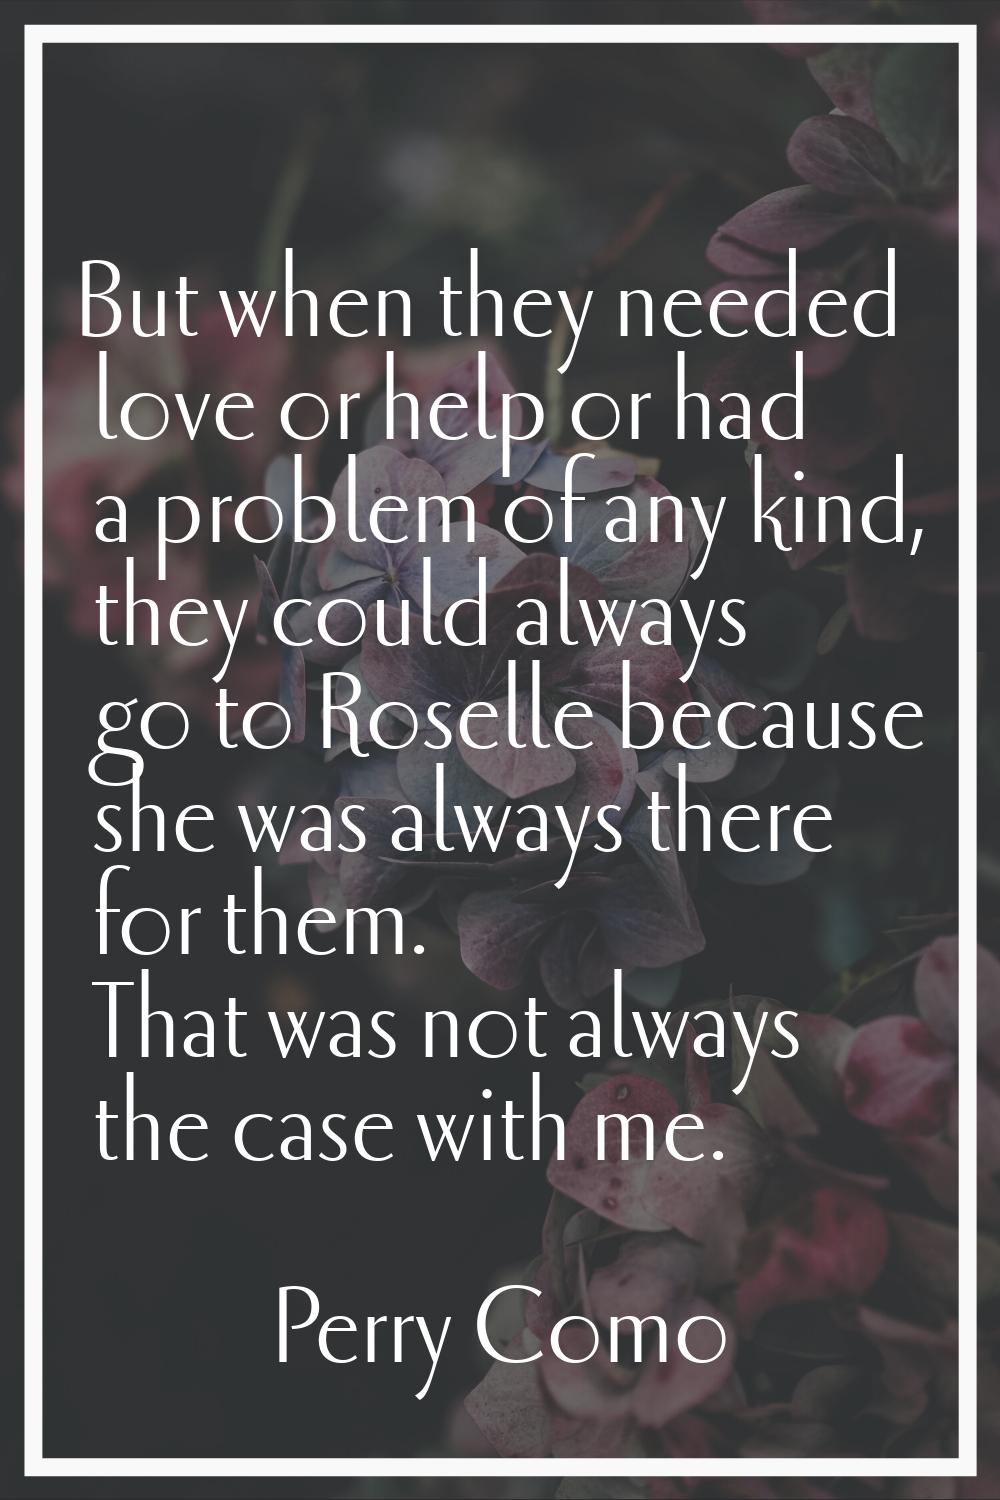 But when they needed love or help or had a problem of any kind, they could always go to Roselle bec